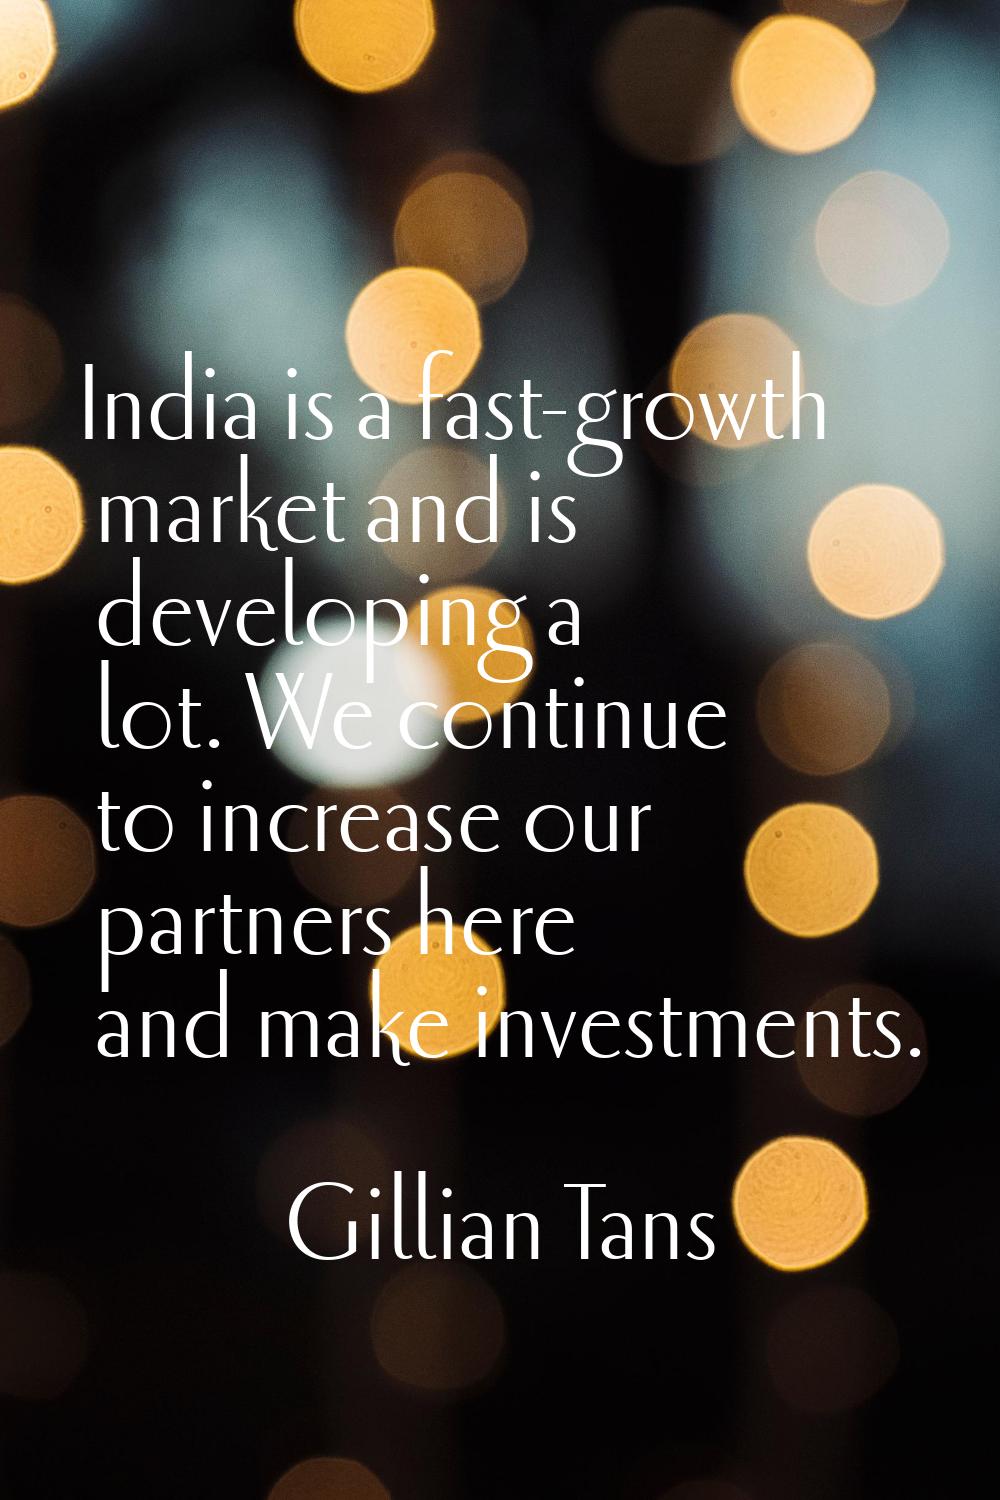 India is a fast-growth market and is developing a lot. We continue to increase our partners here an